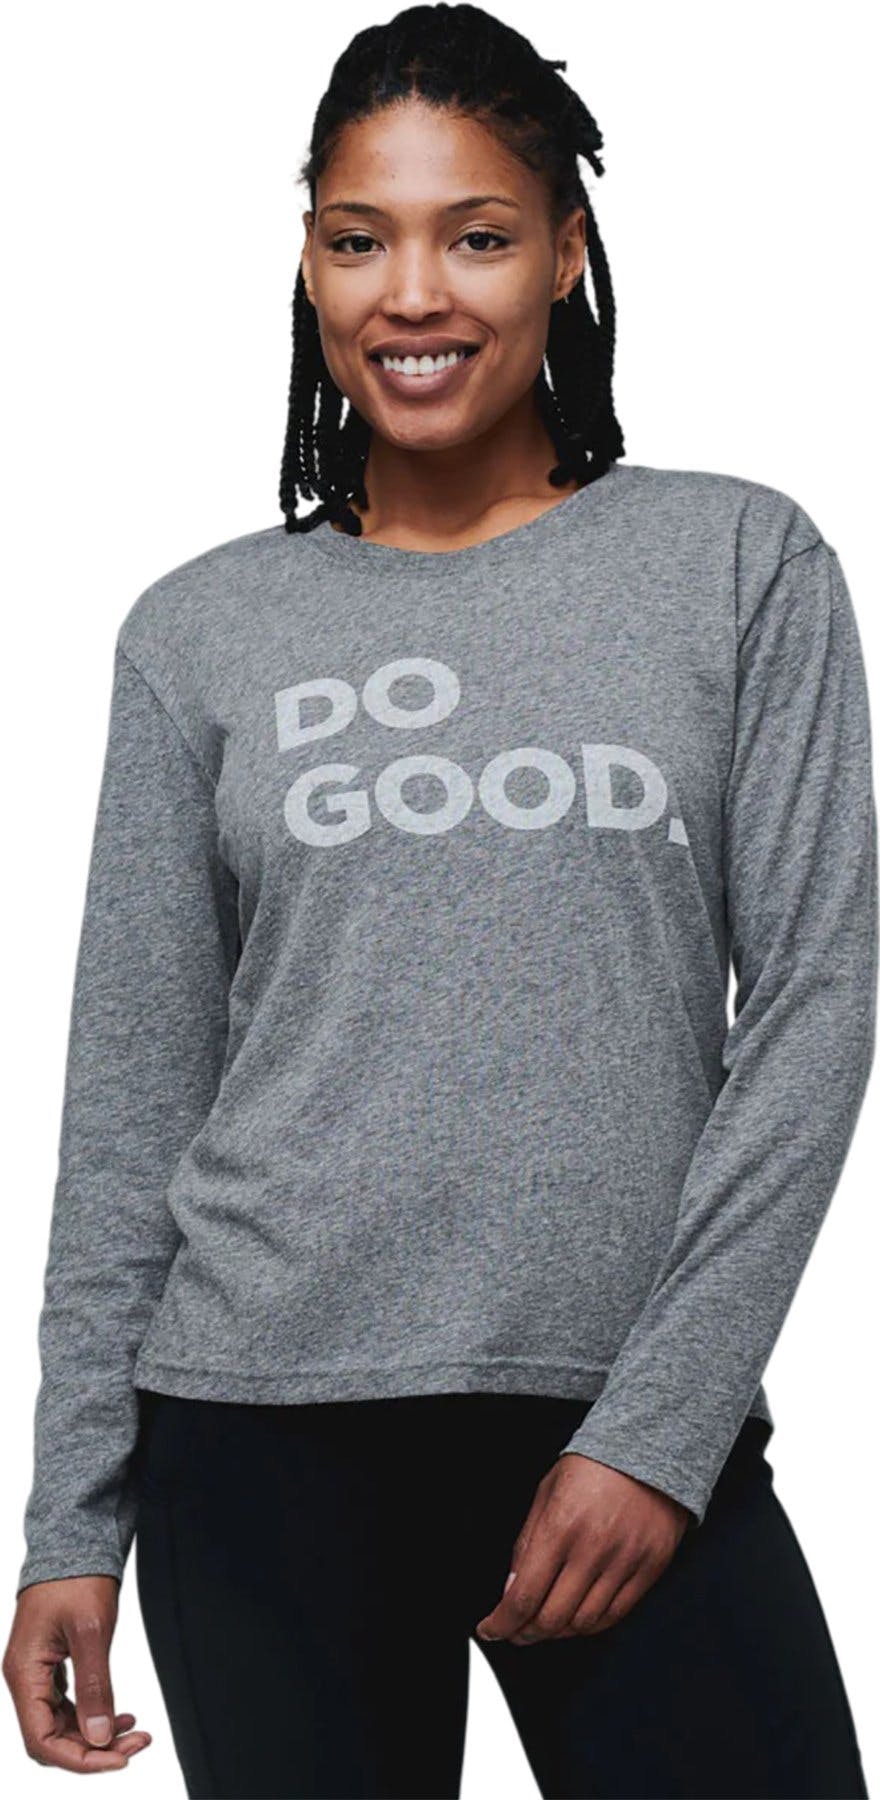 Product image for Do Good Long-Sleeve T-Shirt - Women's